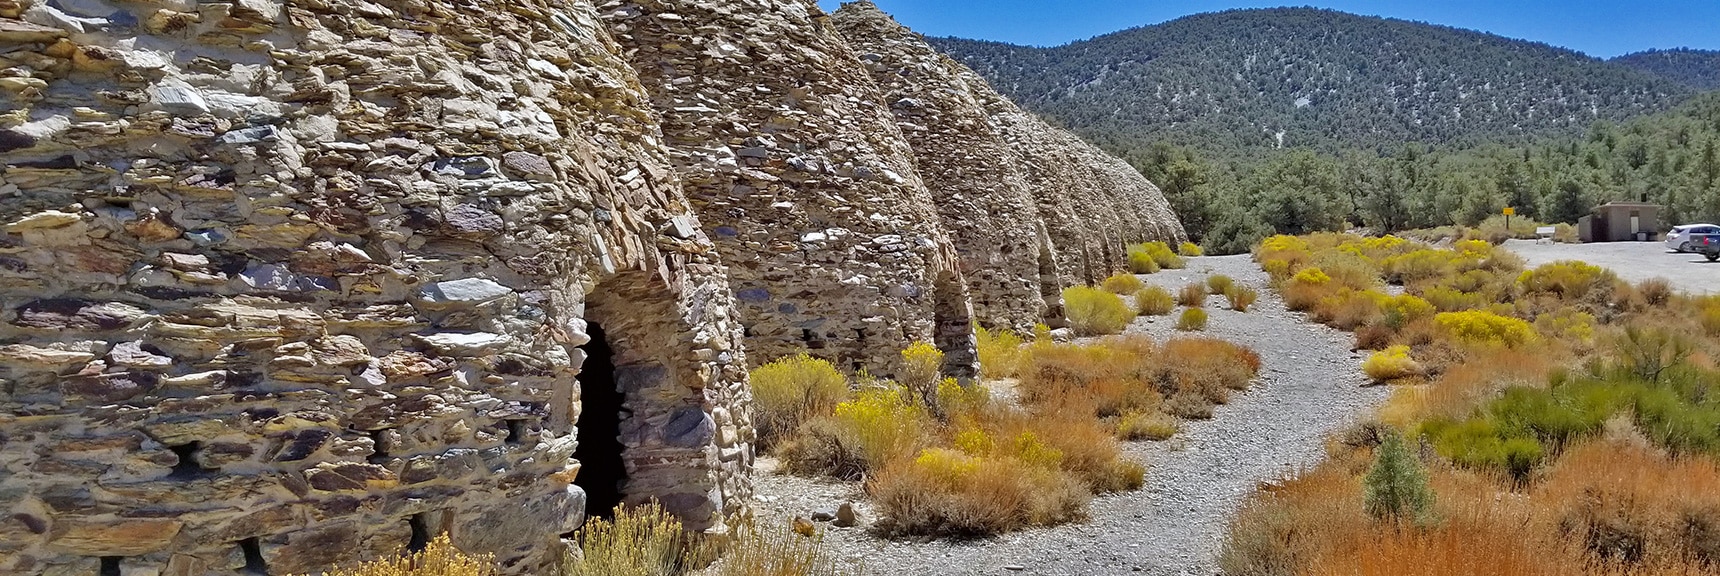 Arrival at Wildrose Charcoal Kilns (Front View from Trailhead) at End of Adventure | Wildrose Peak | Panamint Mountain Range | Death Valley National Park, California